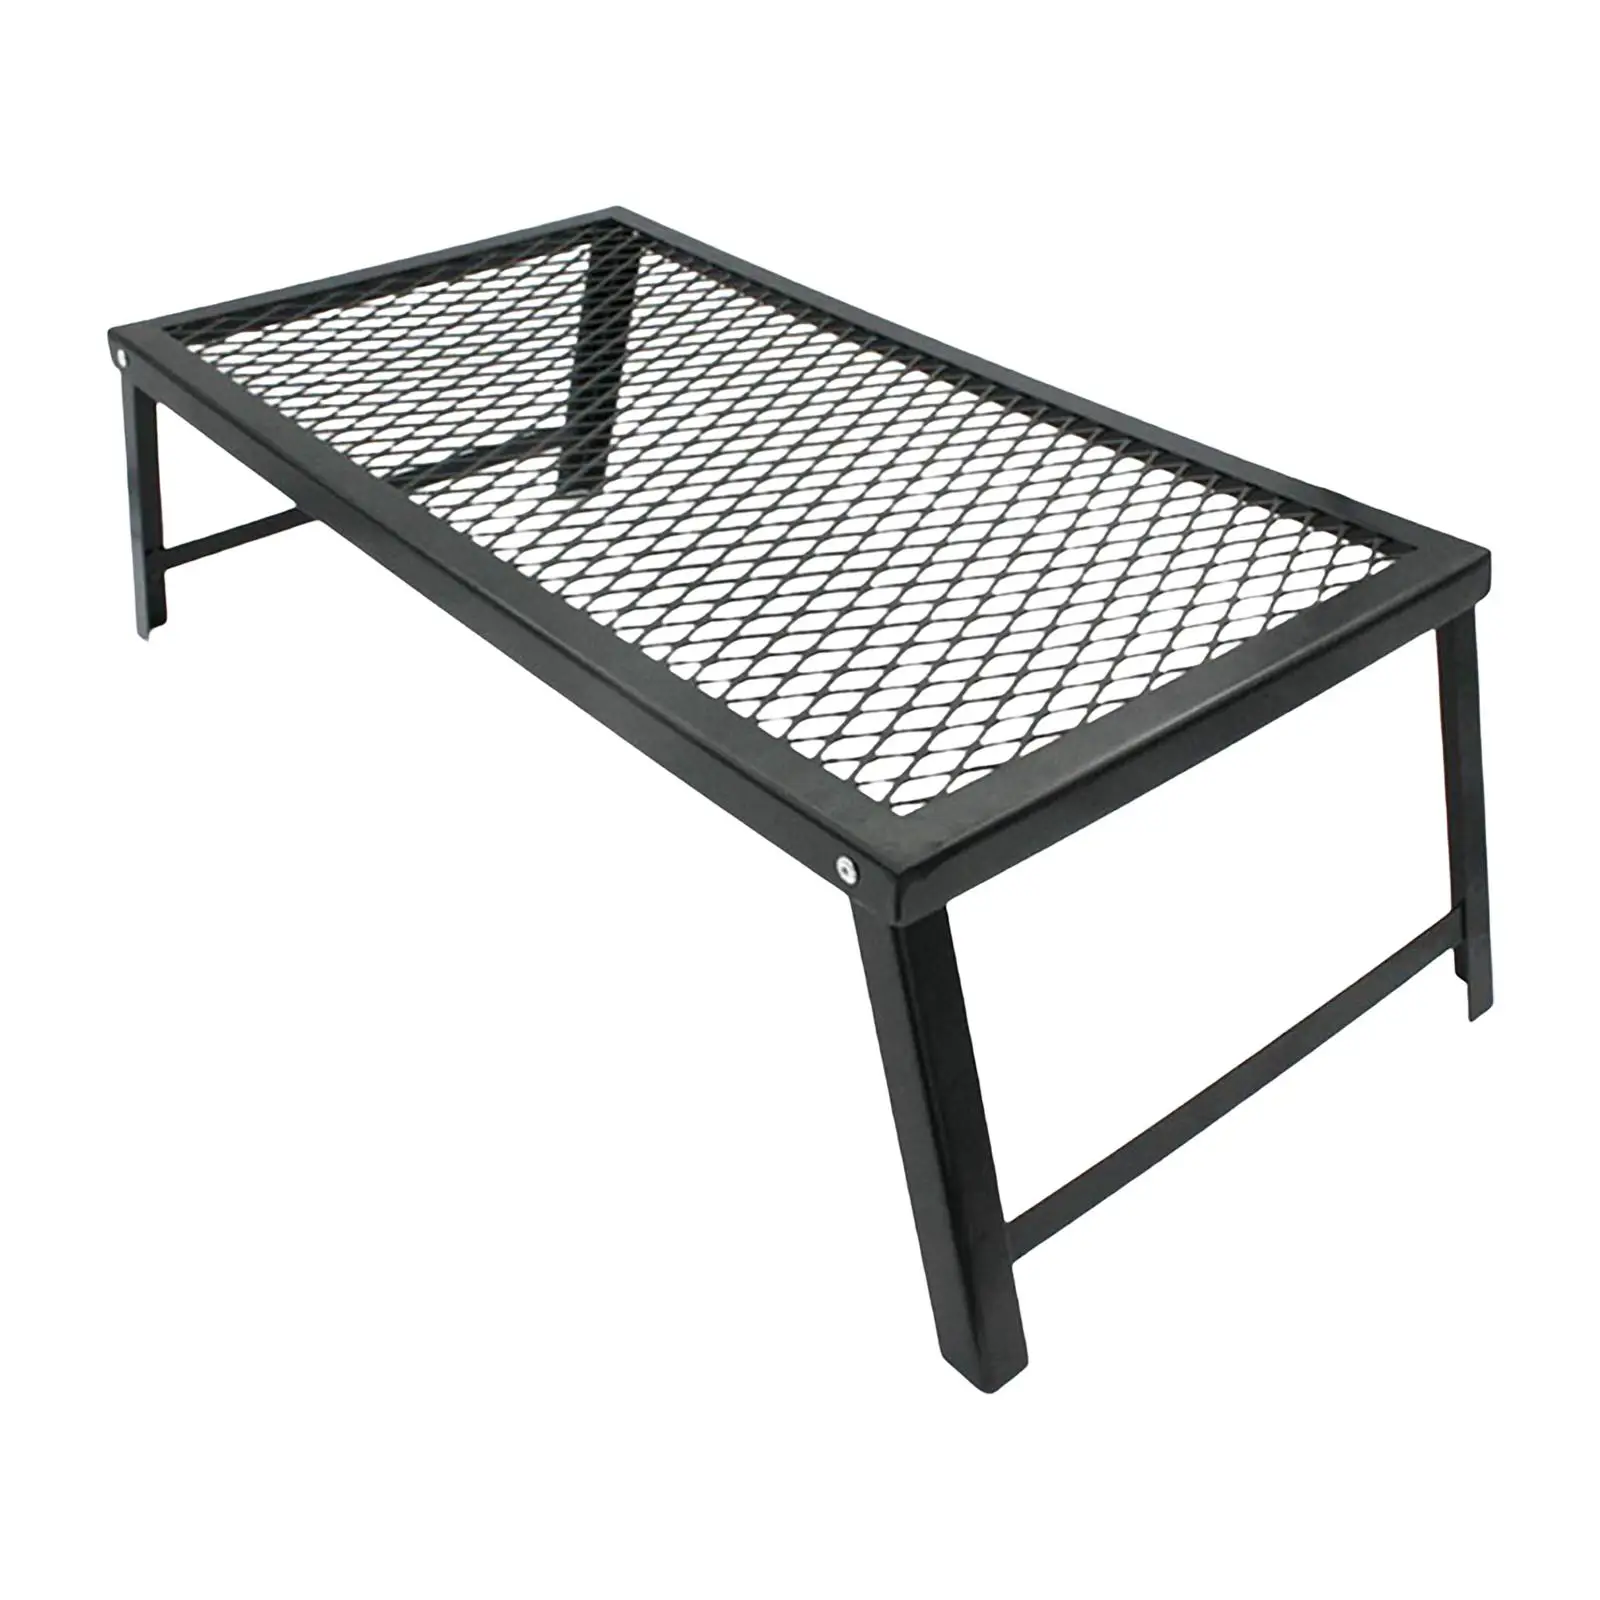 Portable Camping BBQ Table 55x30cm Picnic Grill Grate Grill Mesh Table Folding Mesh Table for Hiking Party Patio Camping Travel